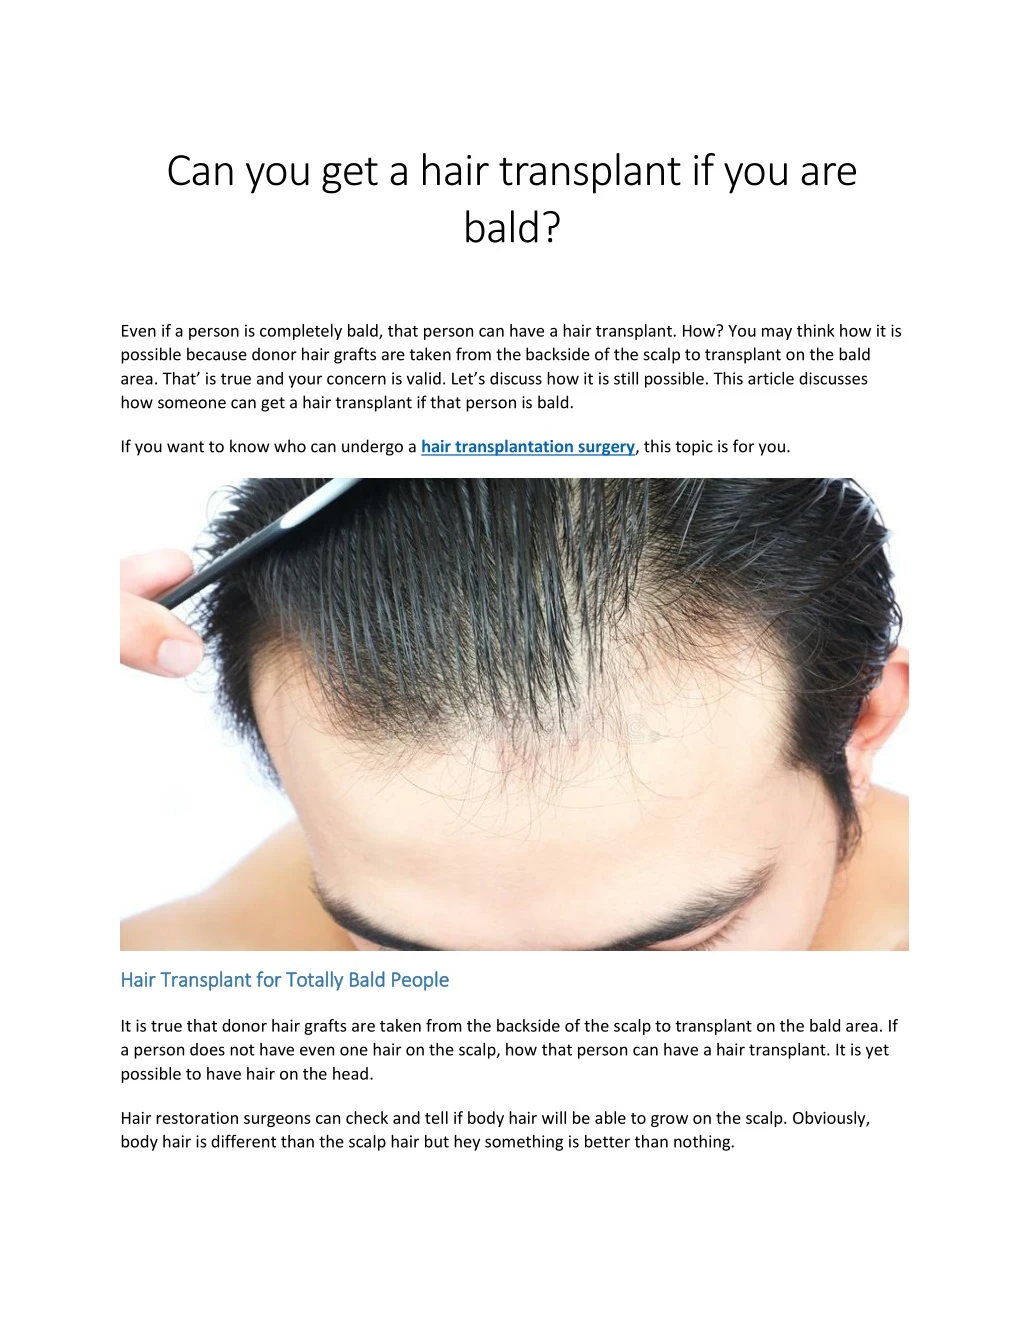 can you get a hair transplant if you are bald